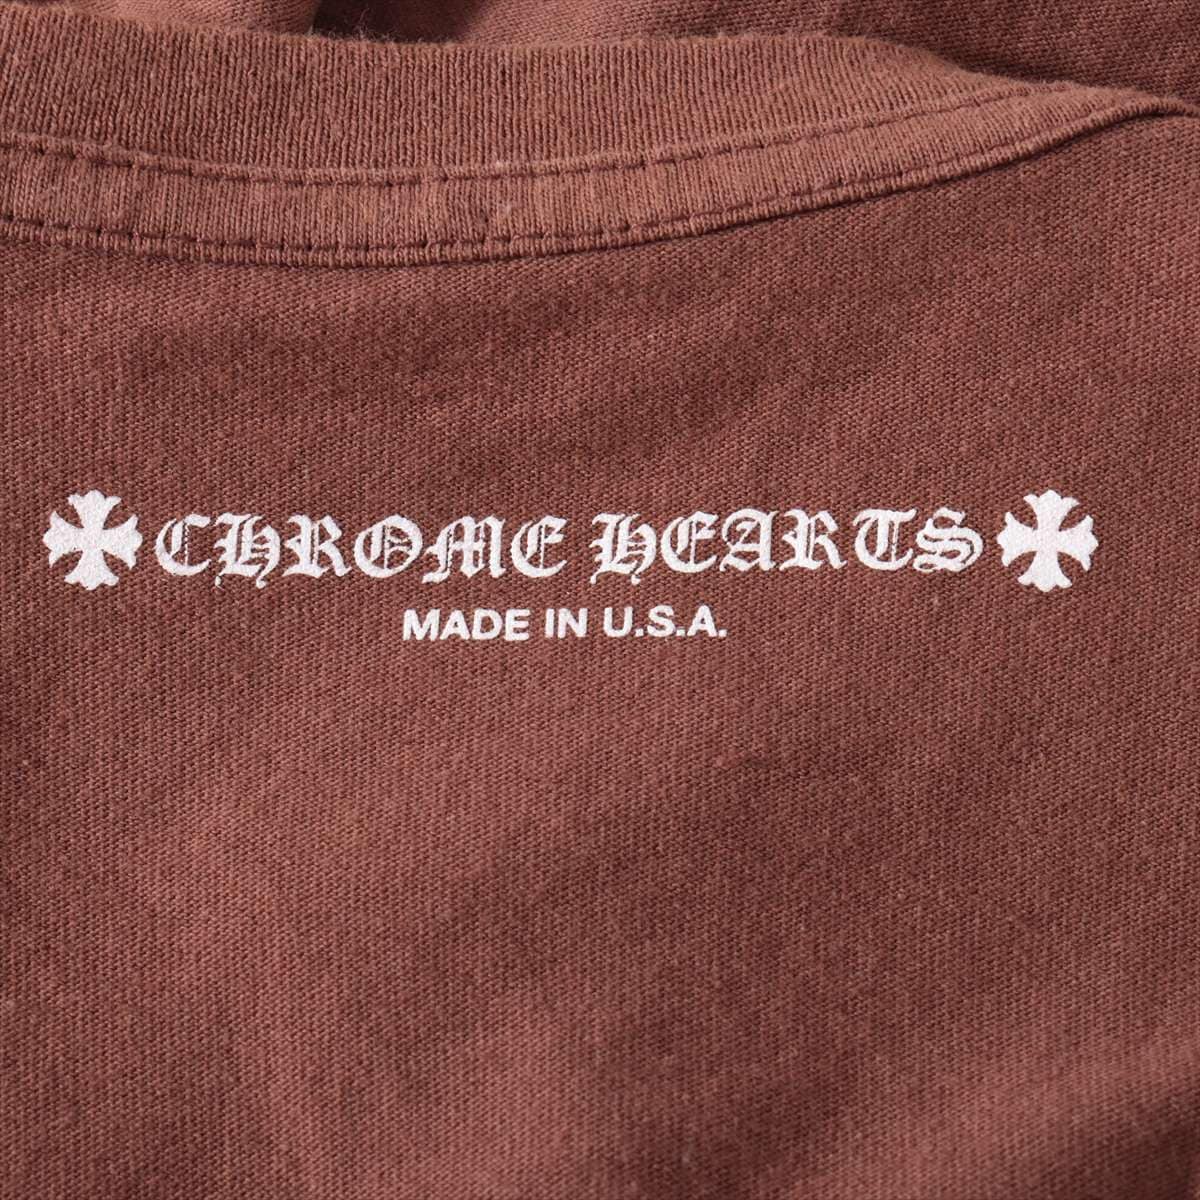 Chrome Hearts Matty Boy T-shirt Cotton  Brown size L There is a stain on the front